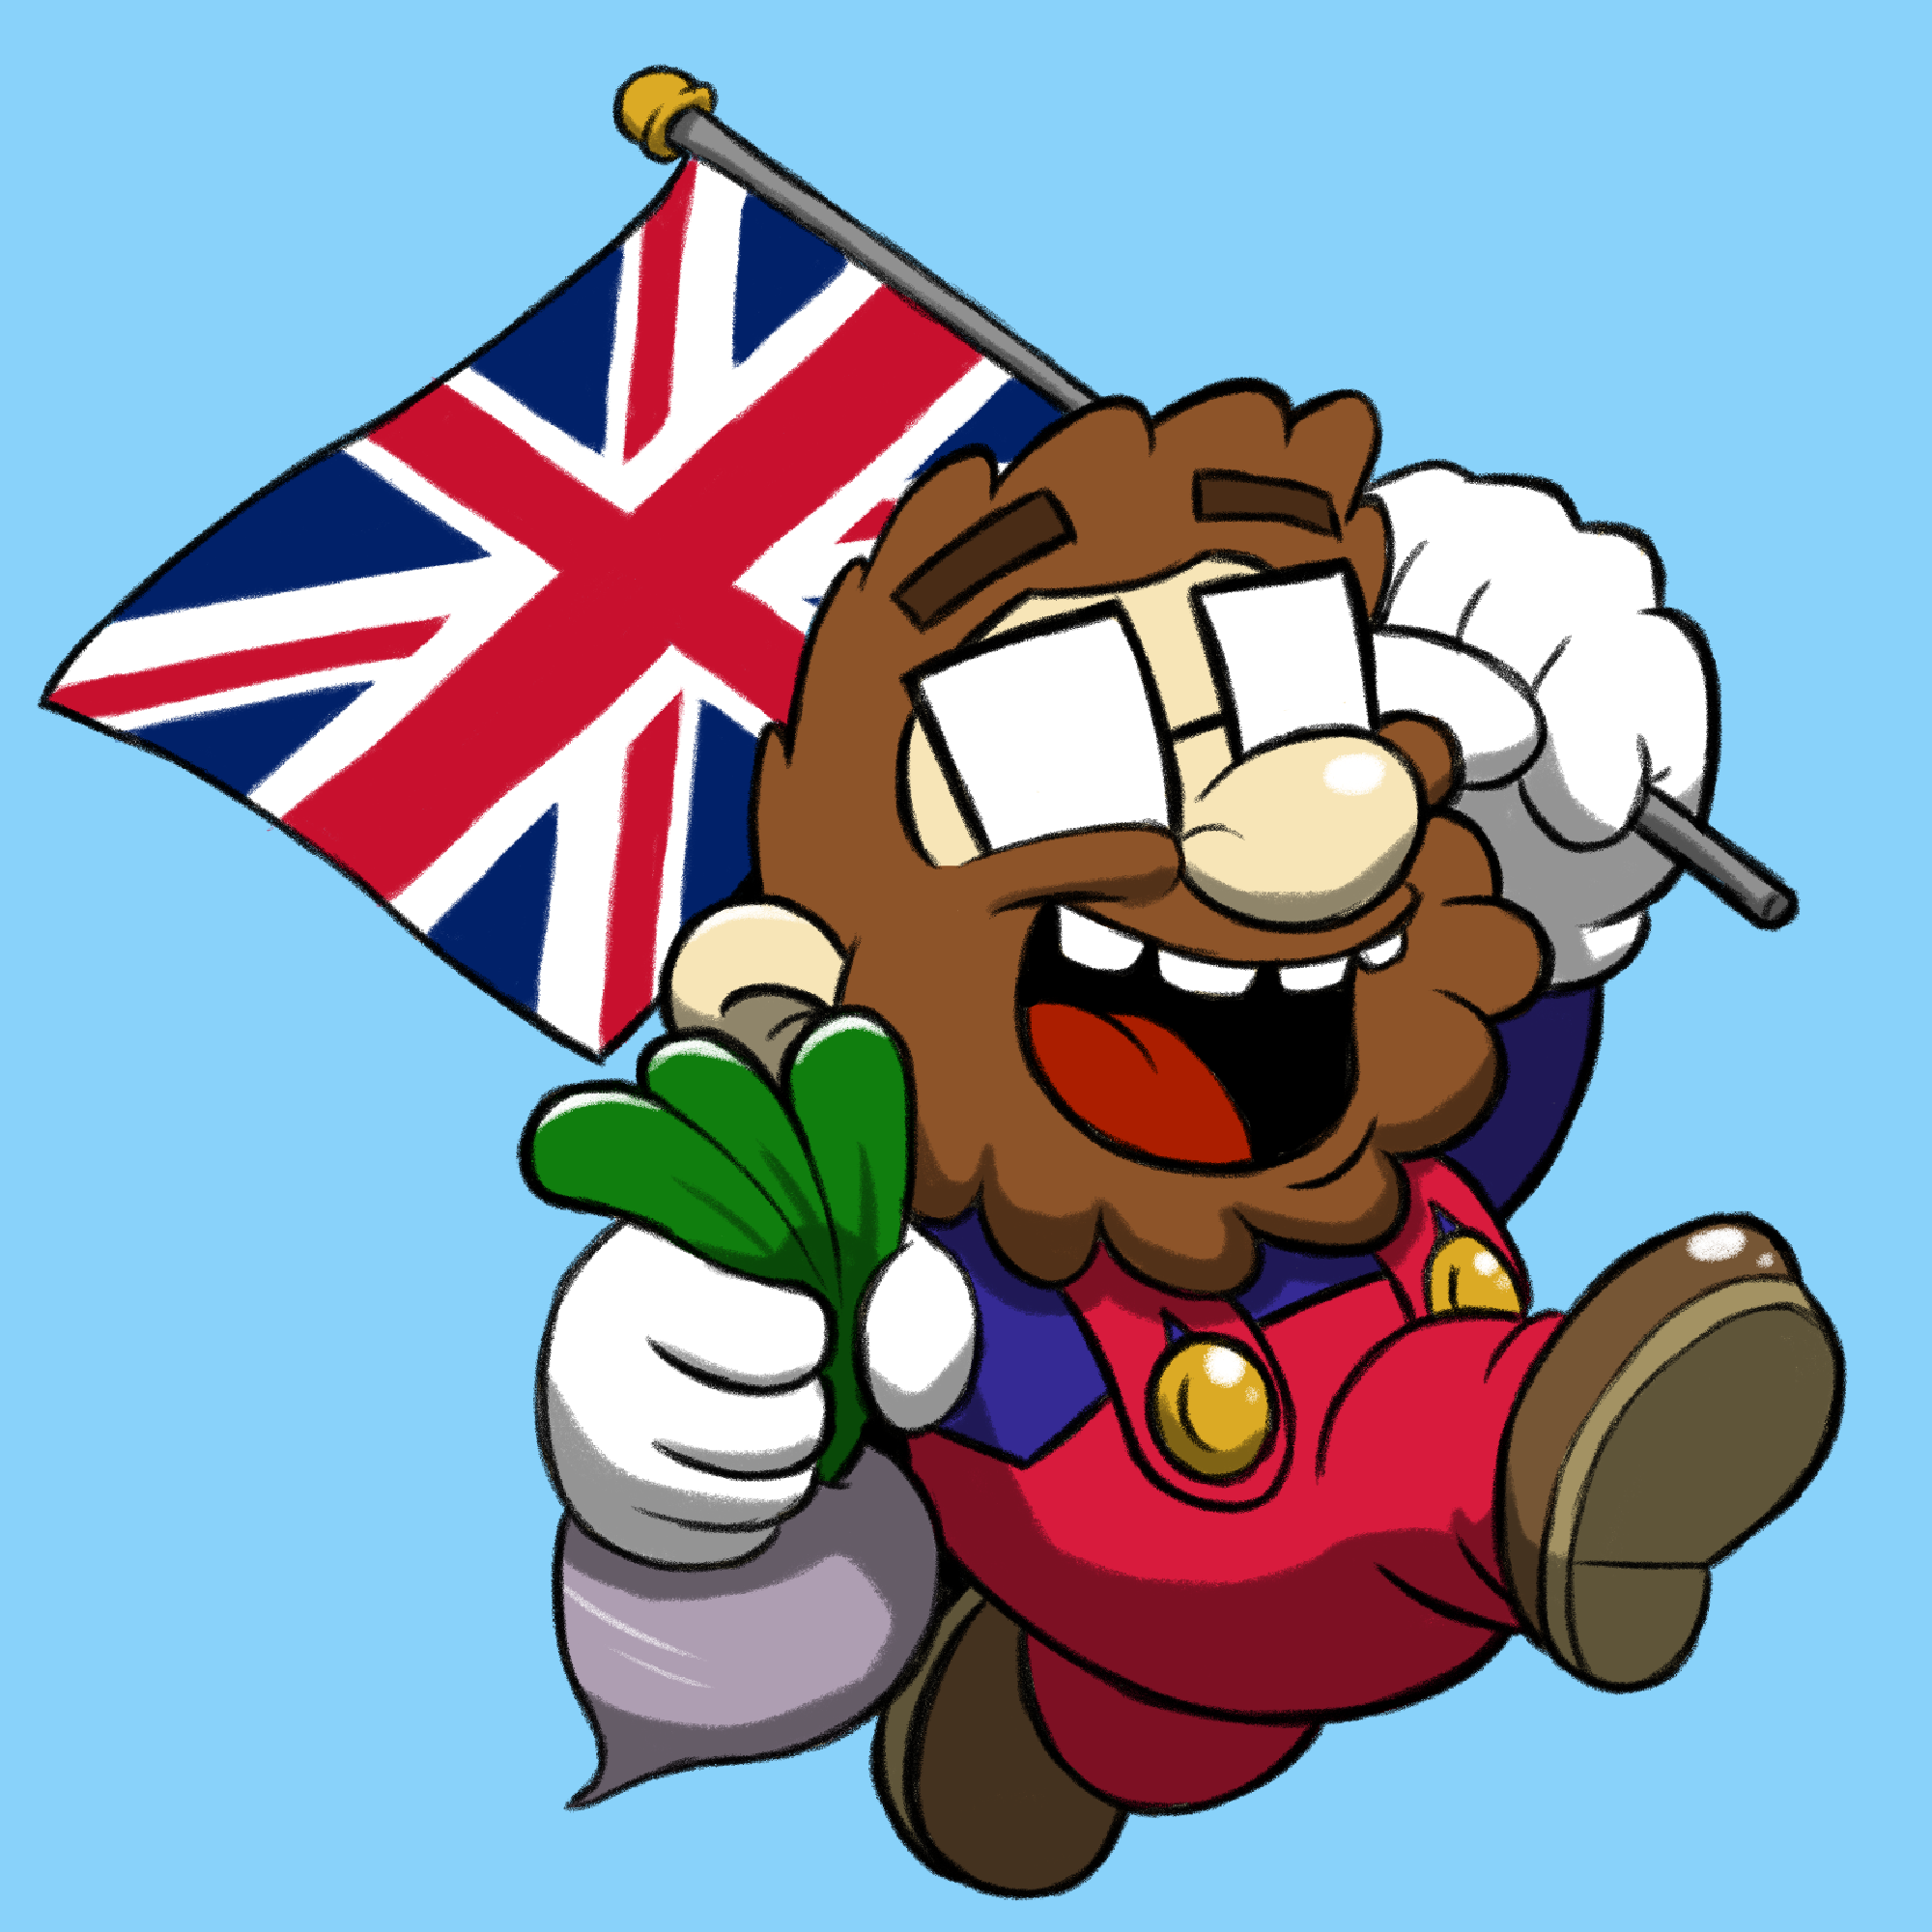 Cartoon of Fryguy64 dressed as Mario and carrying a turnip and a UK flag